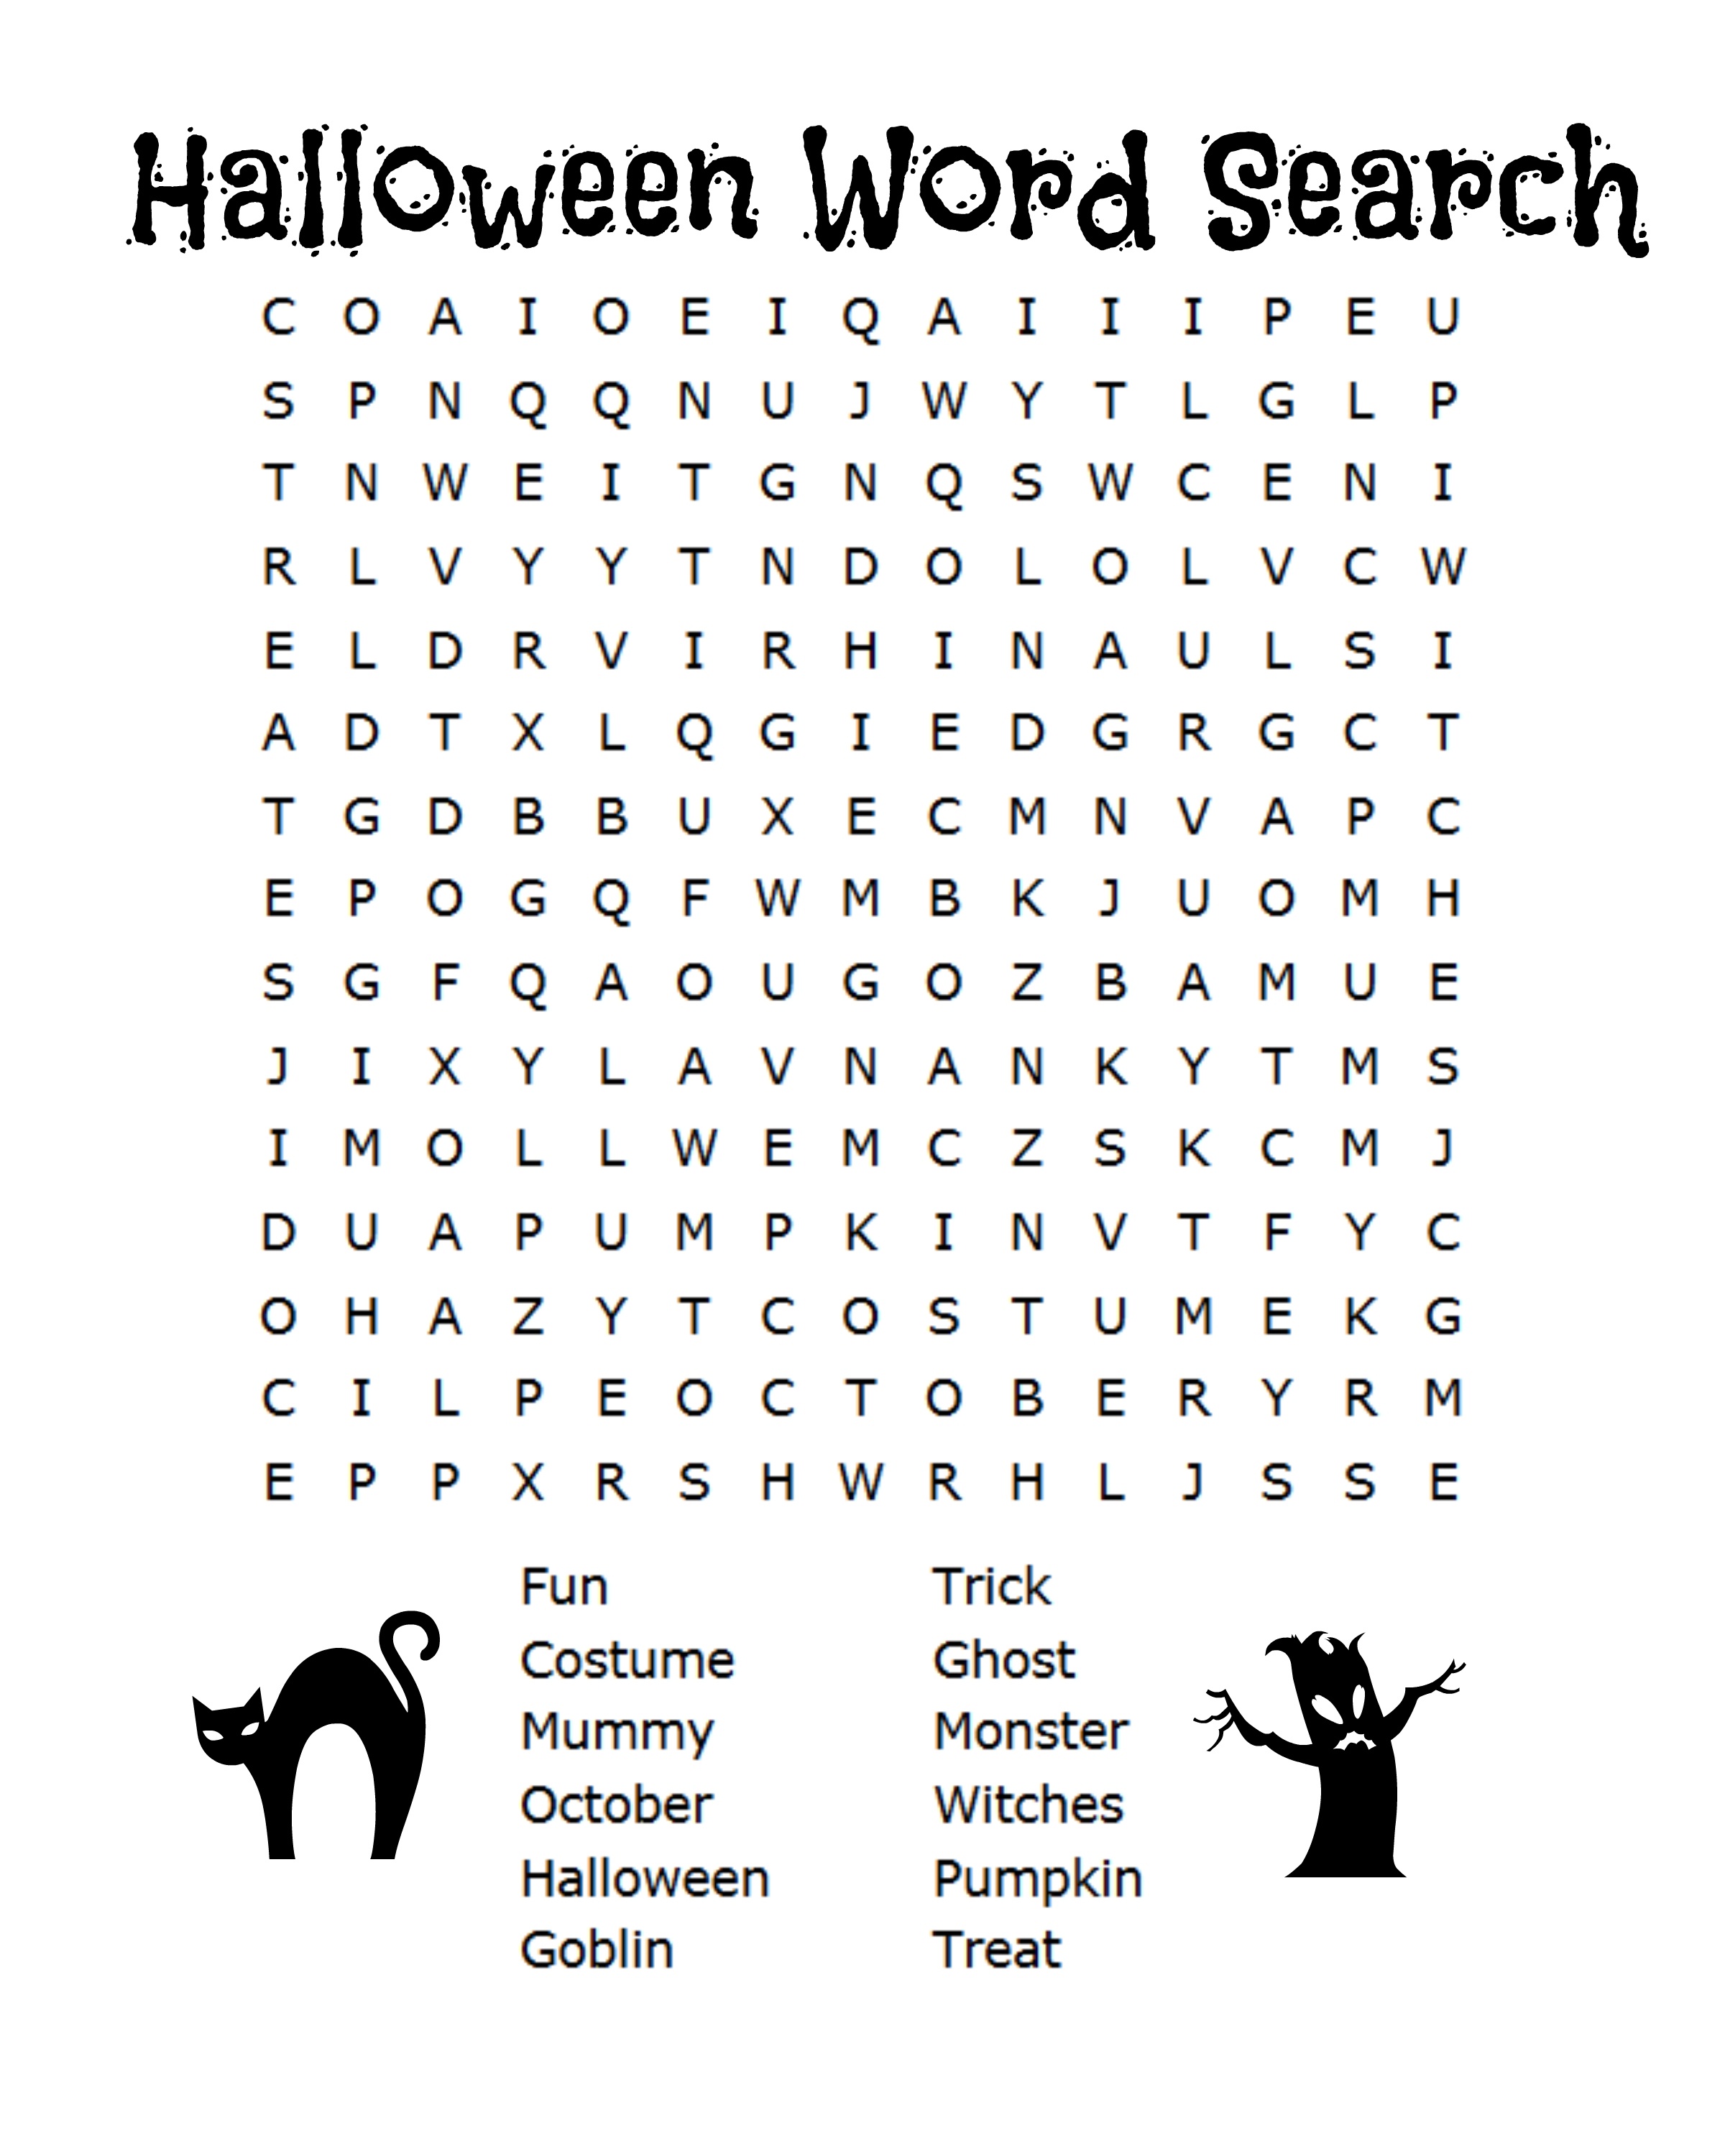 26 Spooky Halloween Word Searches | Kittybabylove - Free Printable Halloween Word Search Puzzles